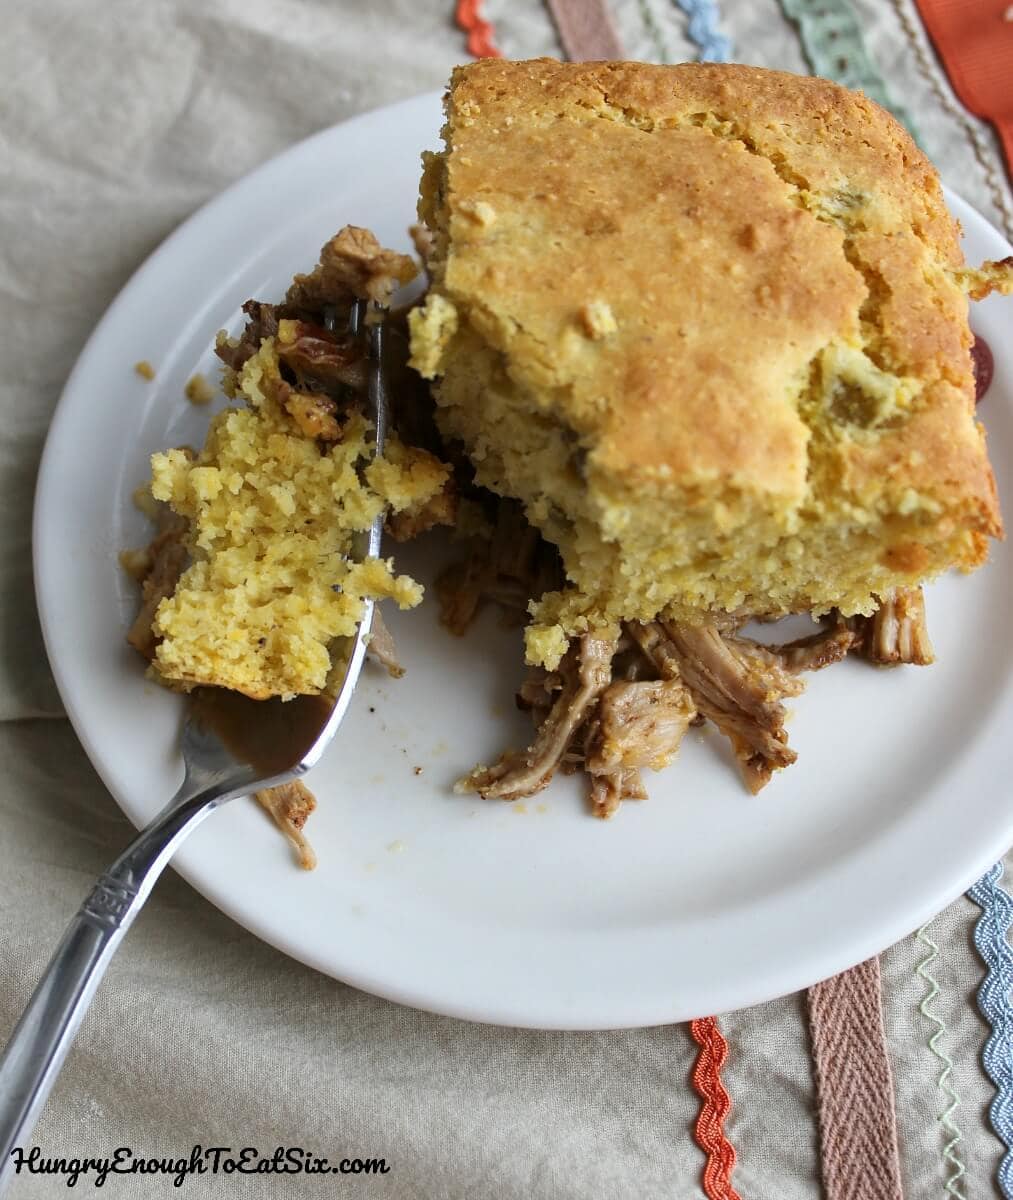 A savory, spicy supper pie with shredded pork and cornbread!